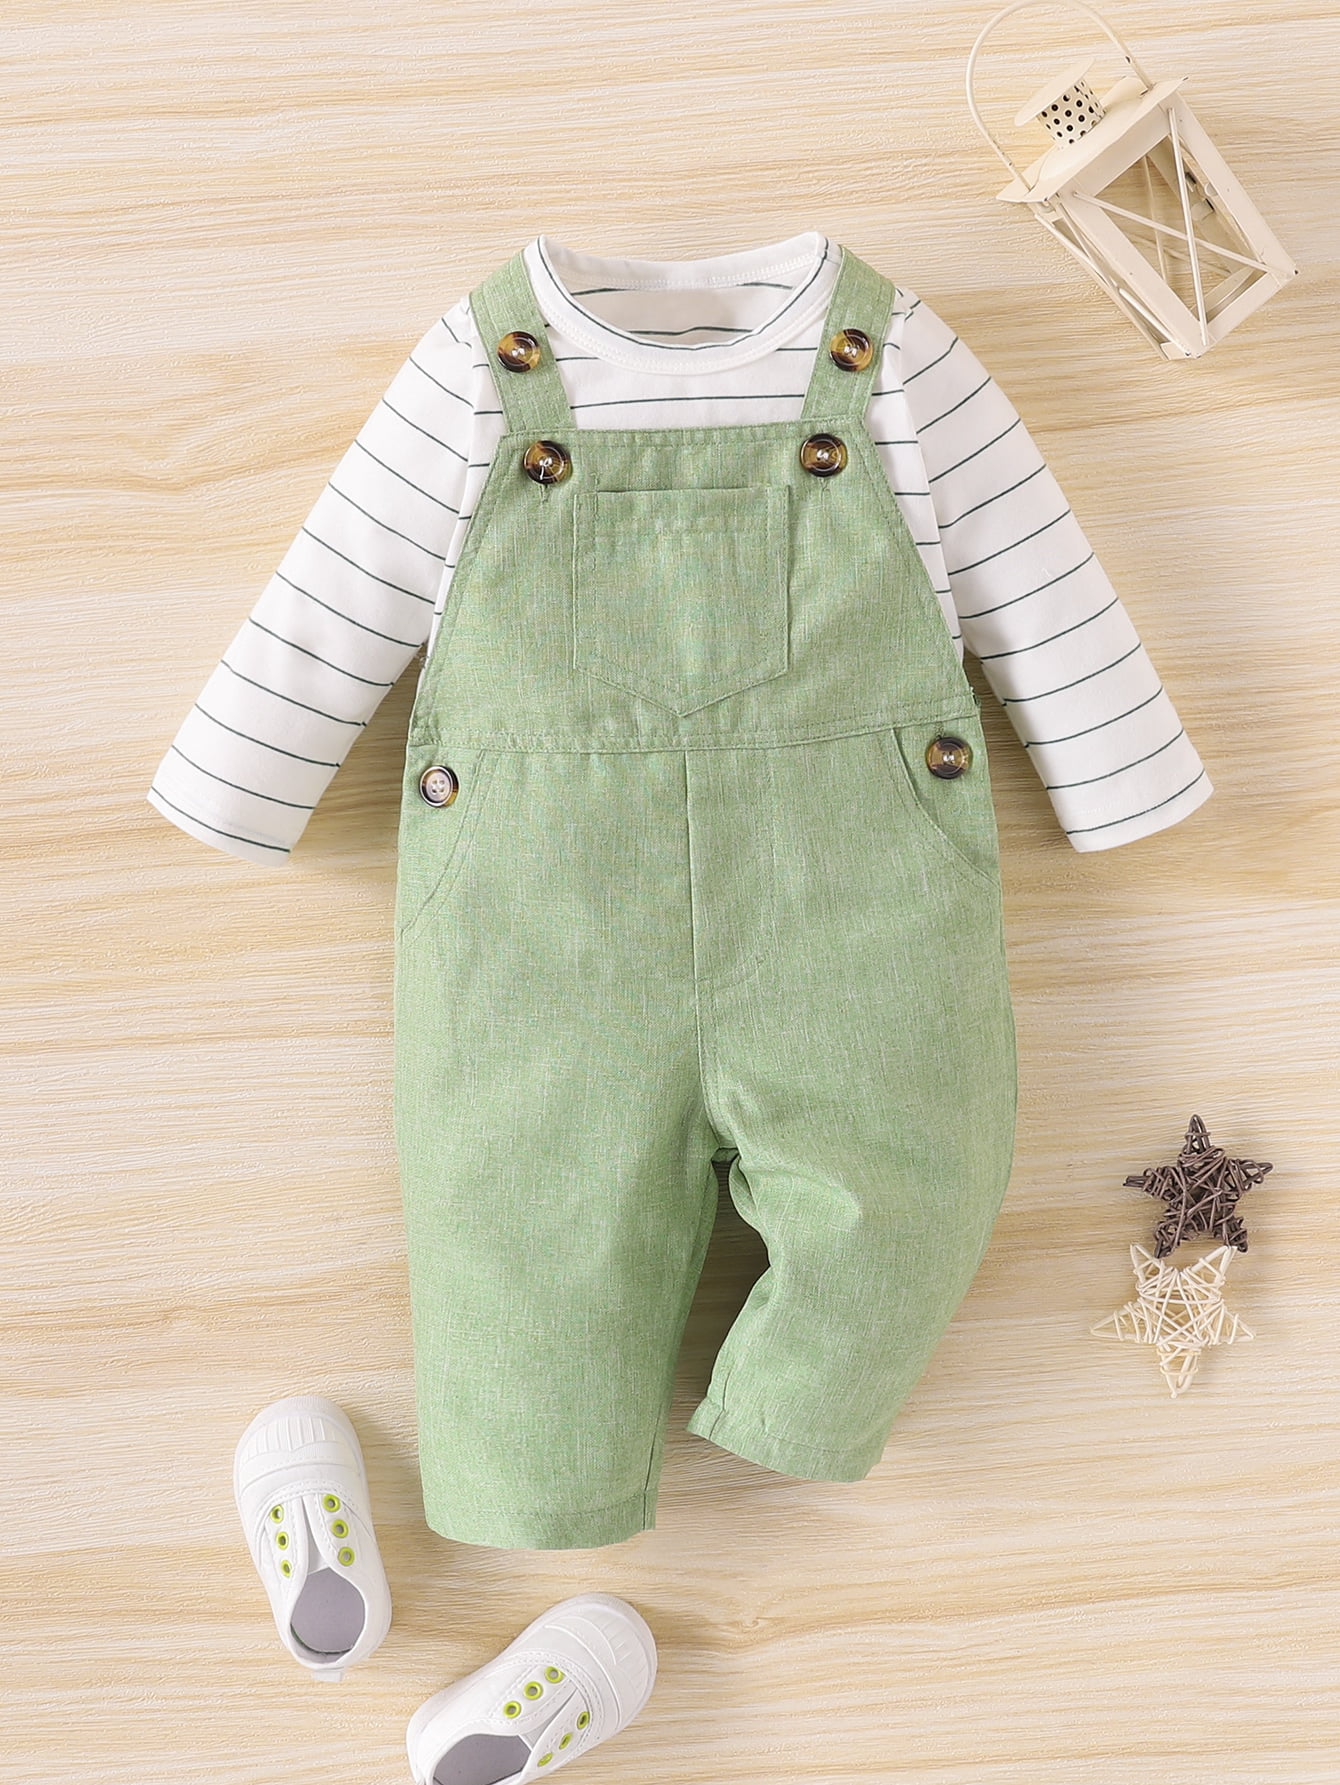 Green discount 94% Gocco dungaree KIDS FASHION Baby Jumpsuits & Dungarees Basic 